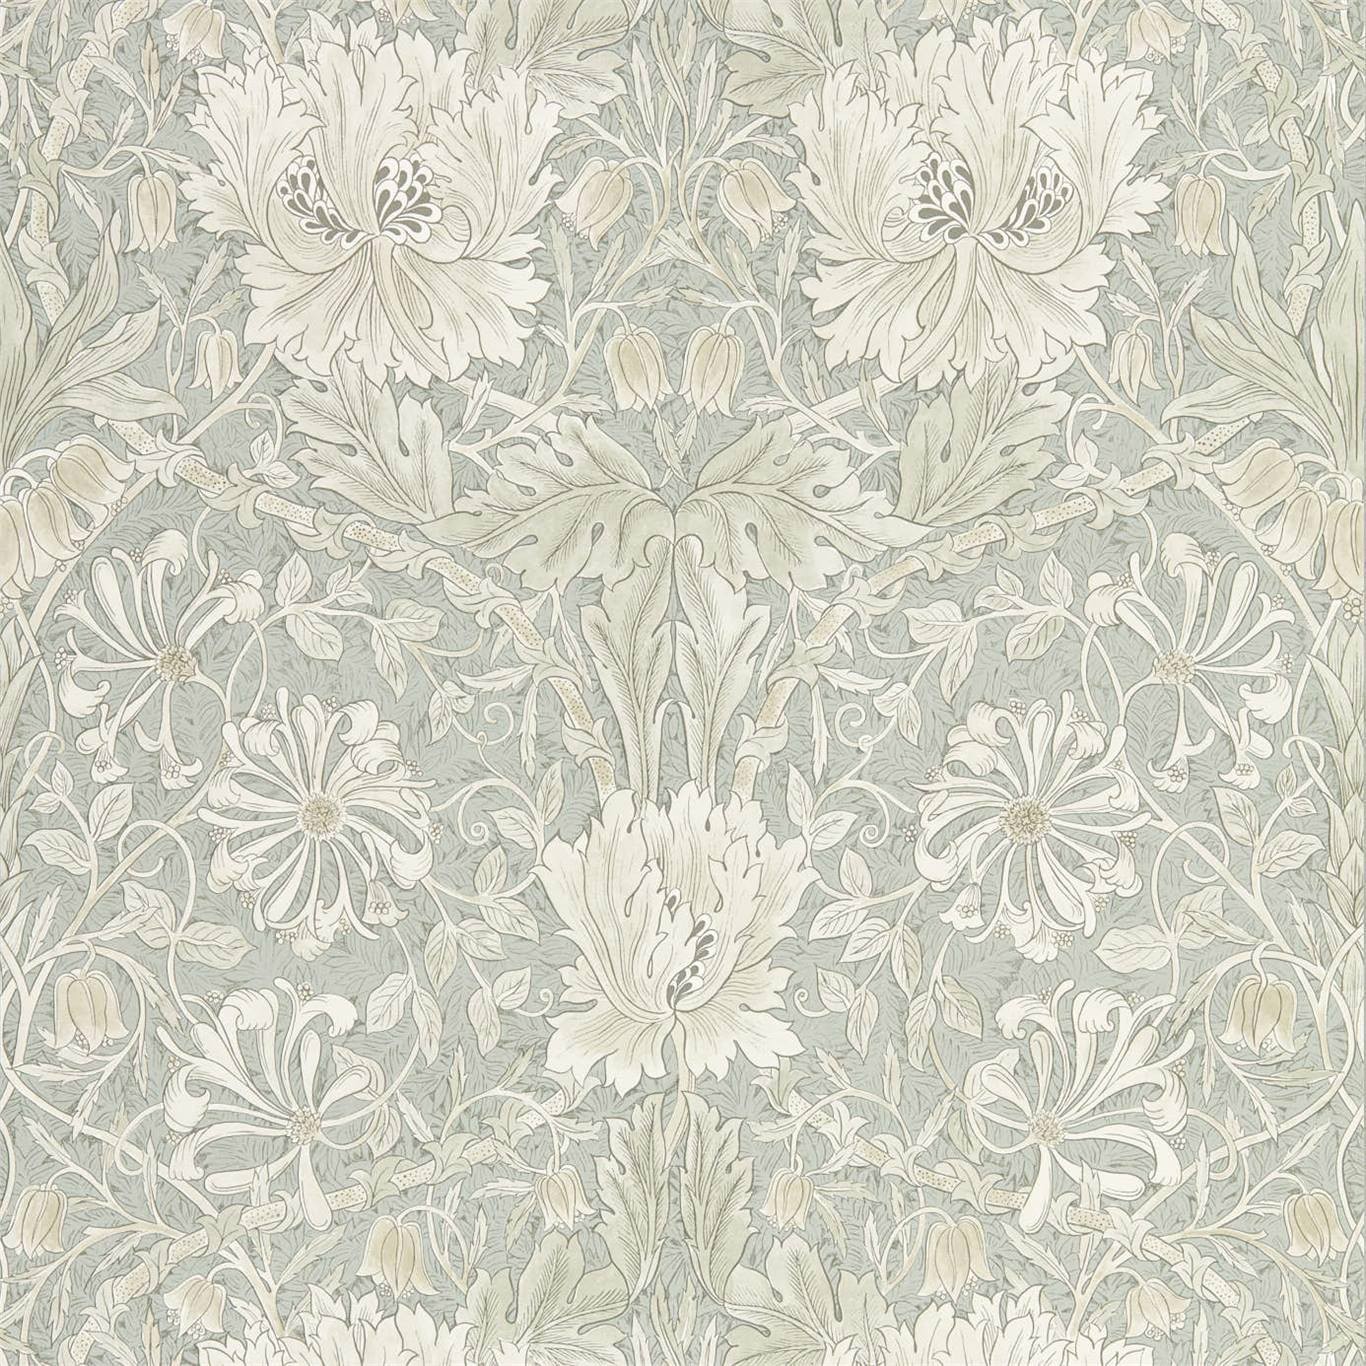 a floral wallpaper with white flowers on a gray background